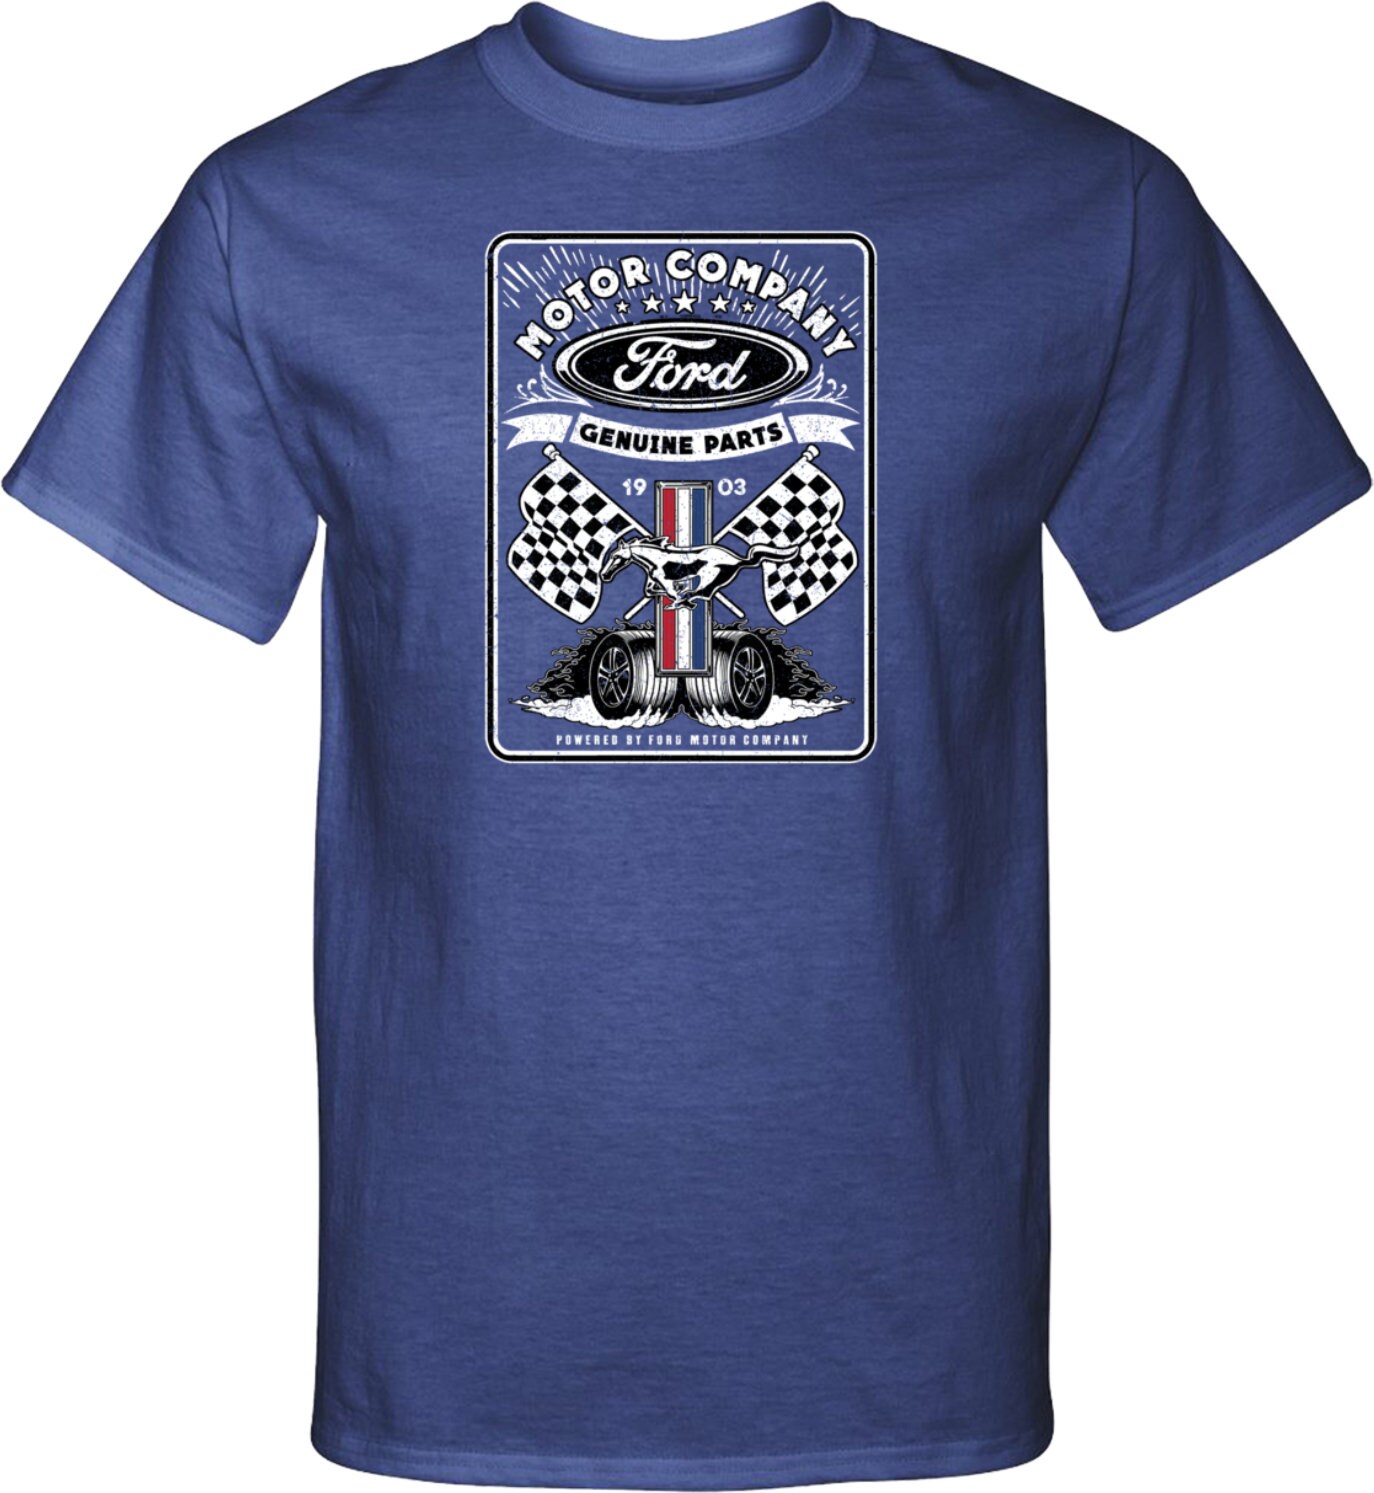 Ford Genuine Parts Racing Motor Company Tall T-shirt | Etsy